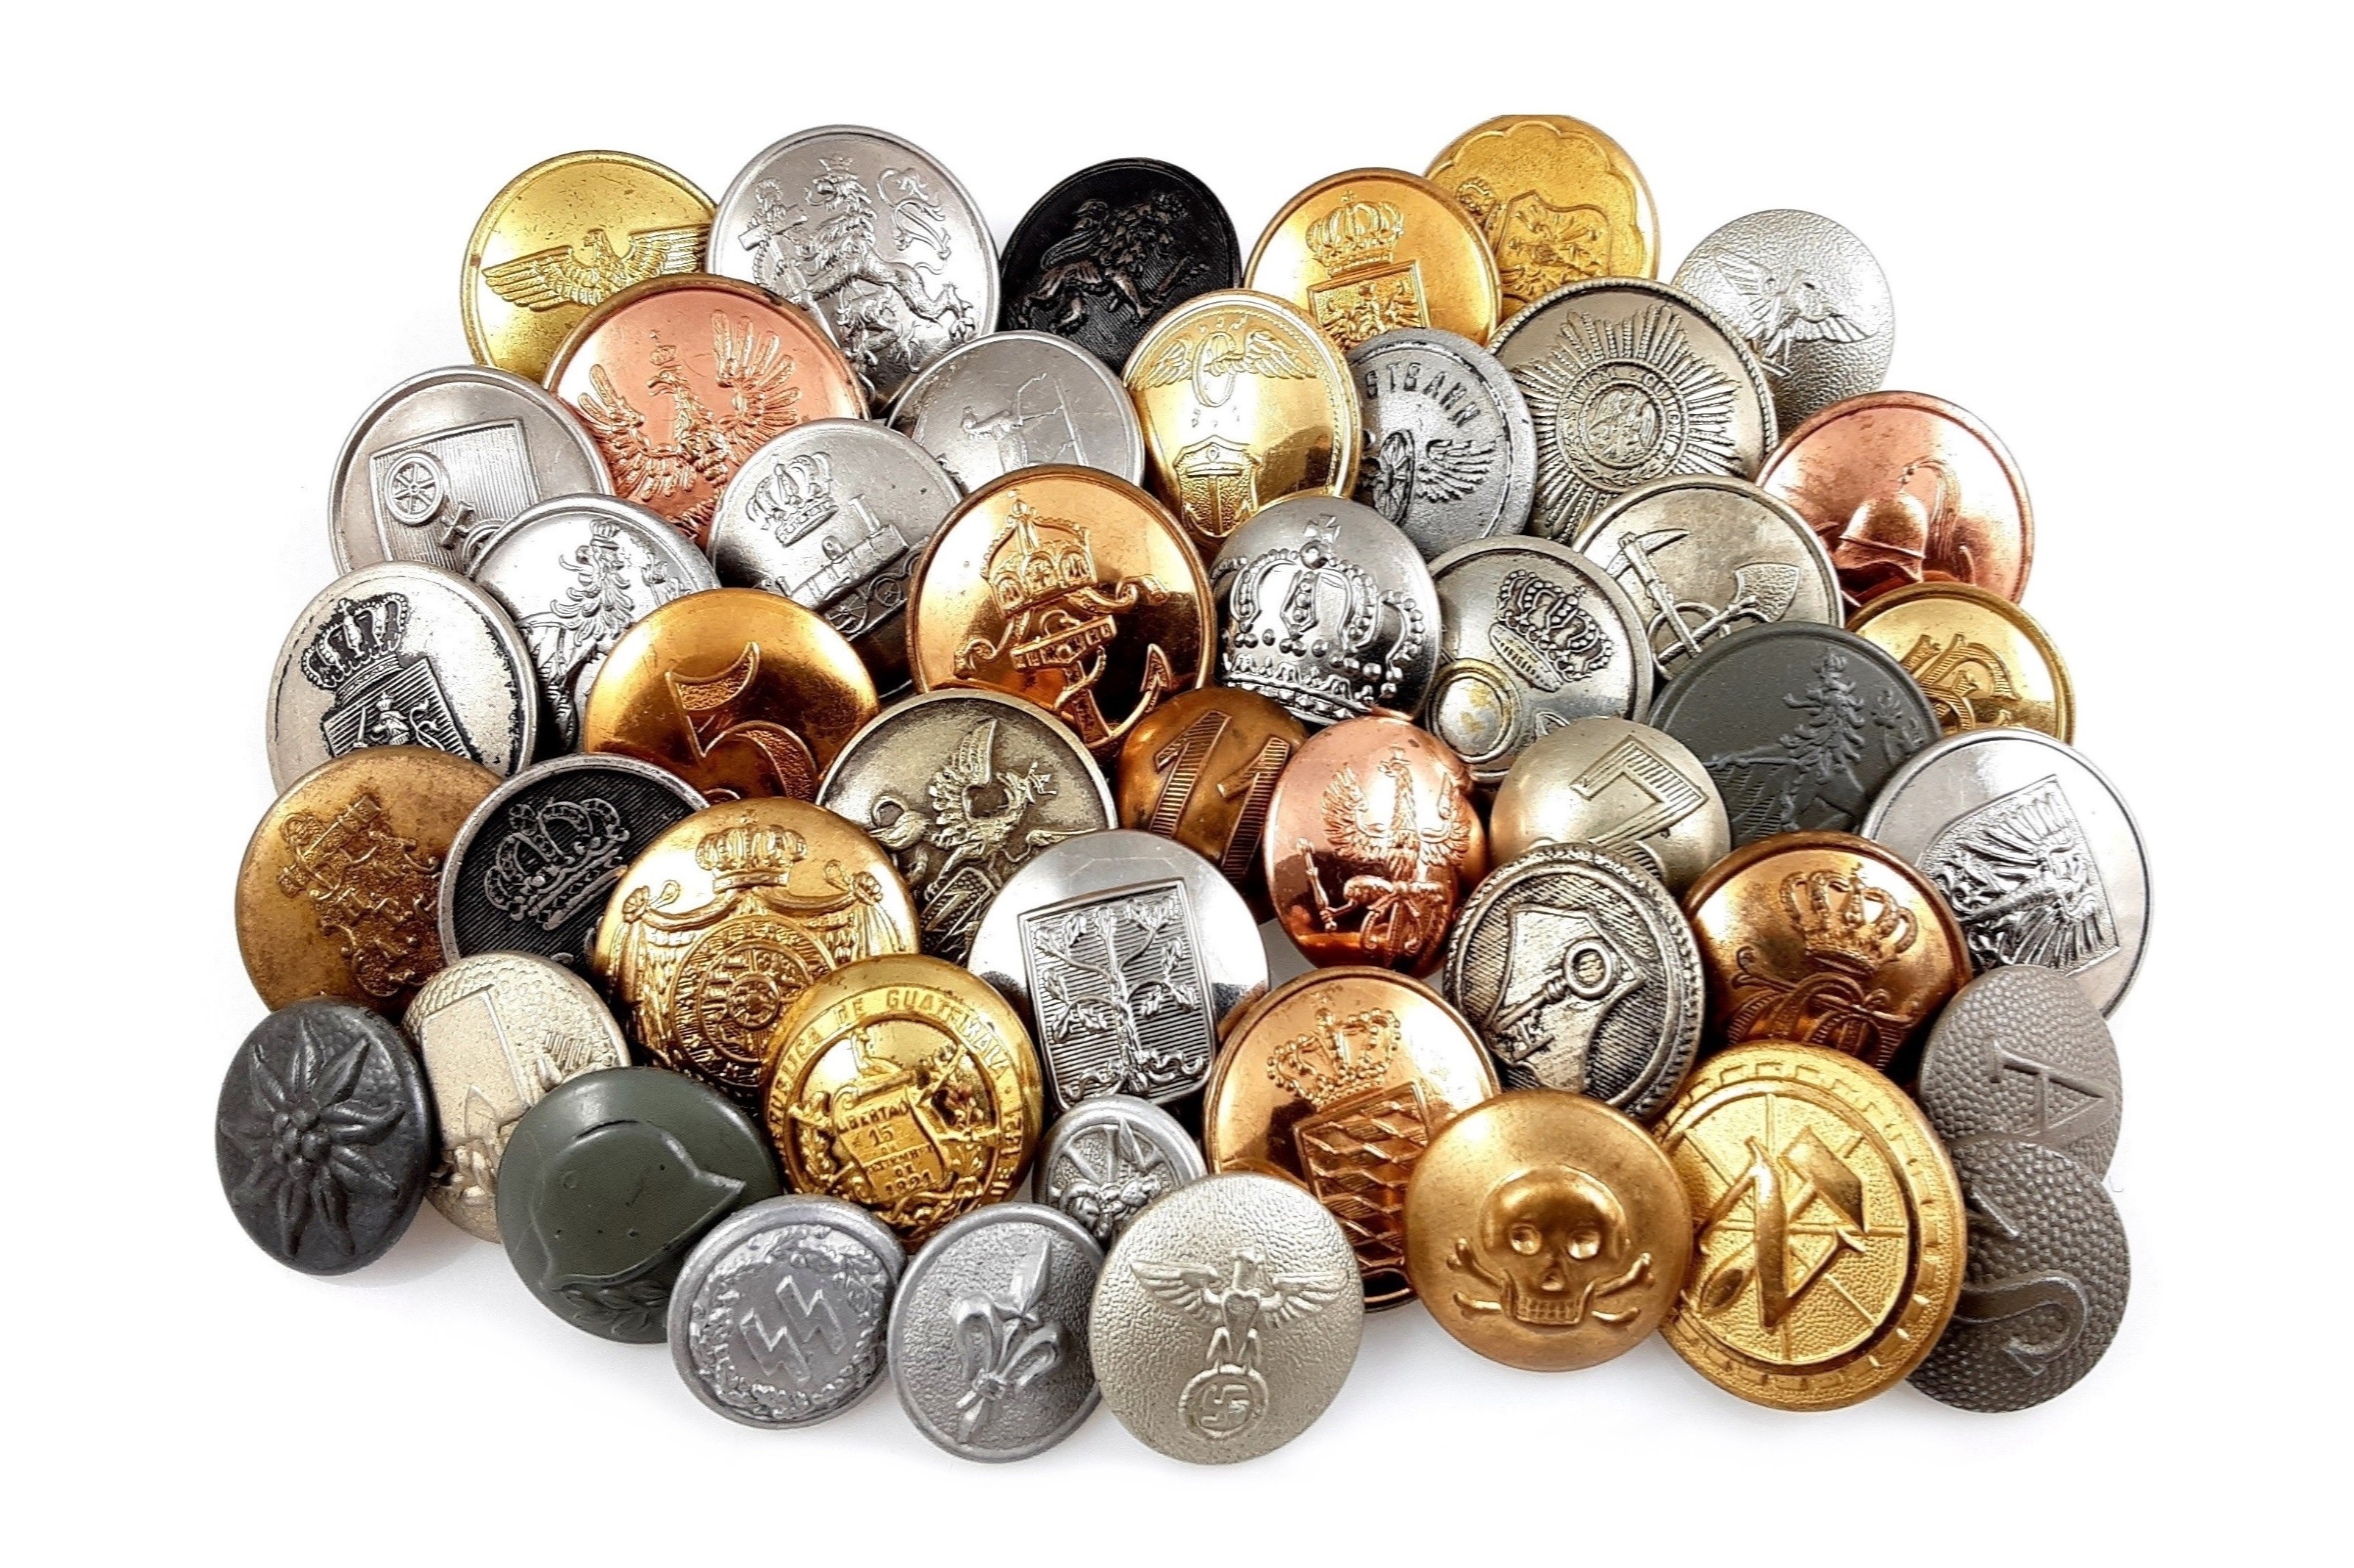 BUTTONS TO 1918